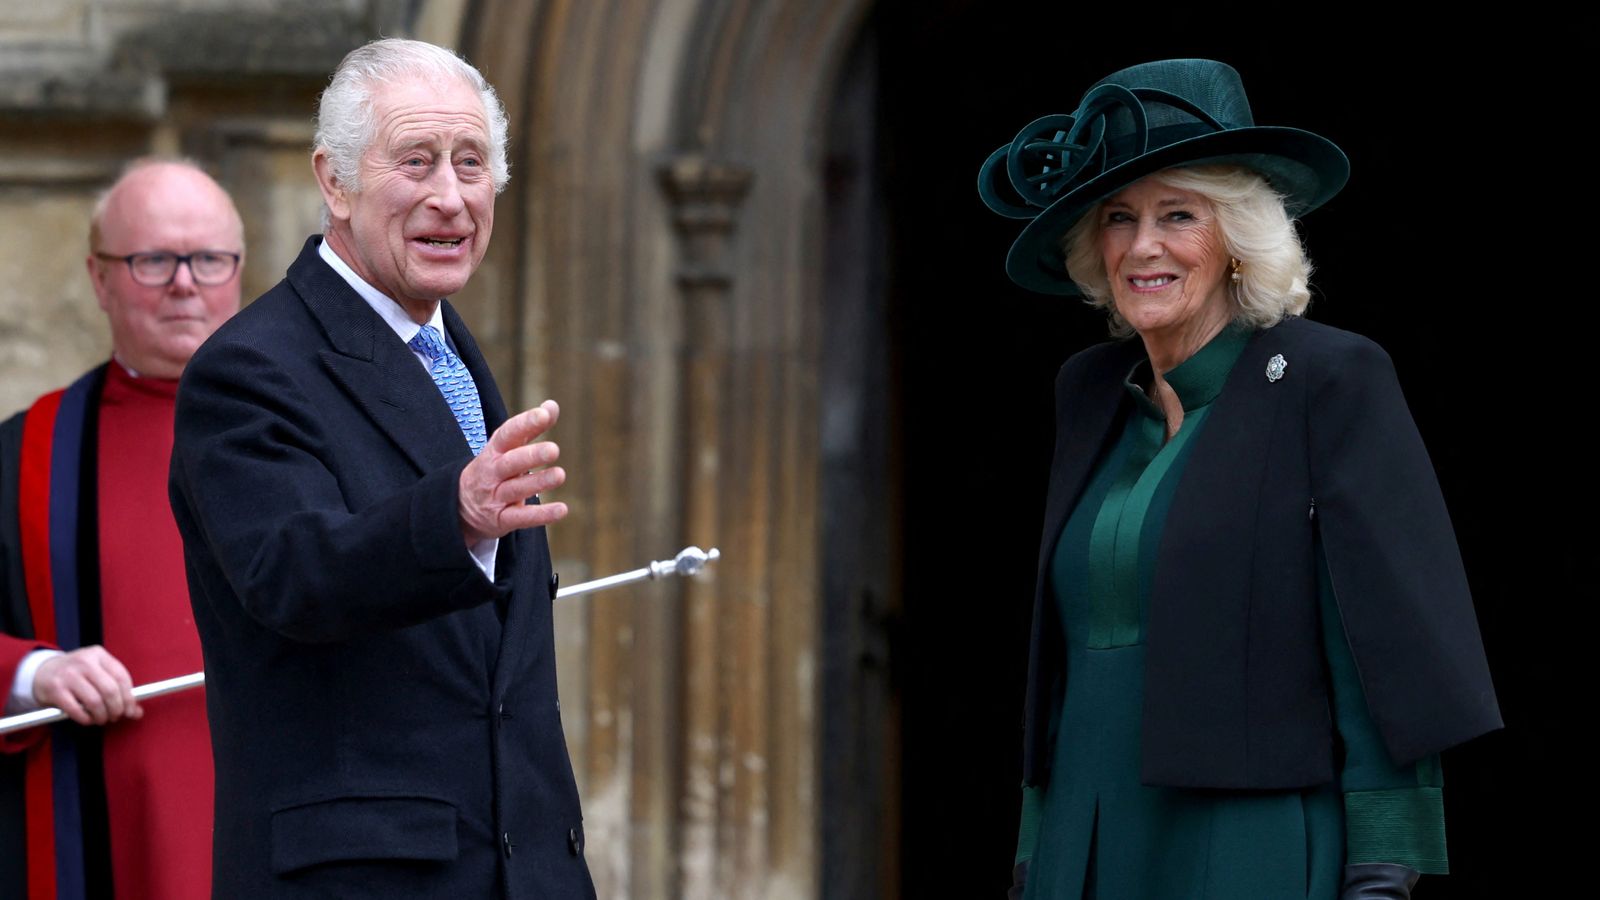 King attends Easter Sunday service but Prince and Princess of Wales absent